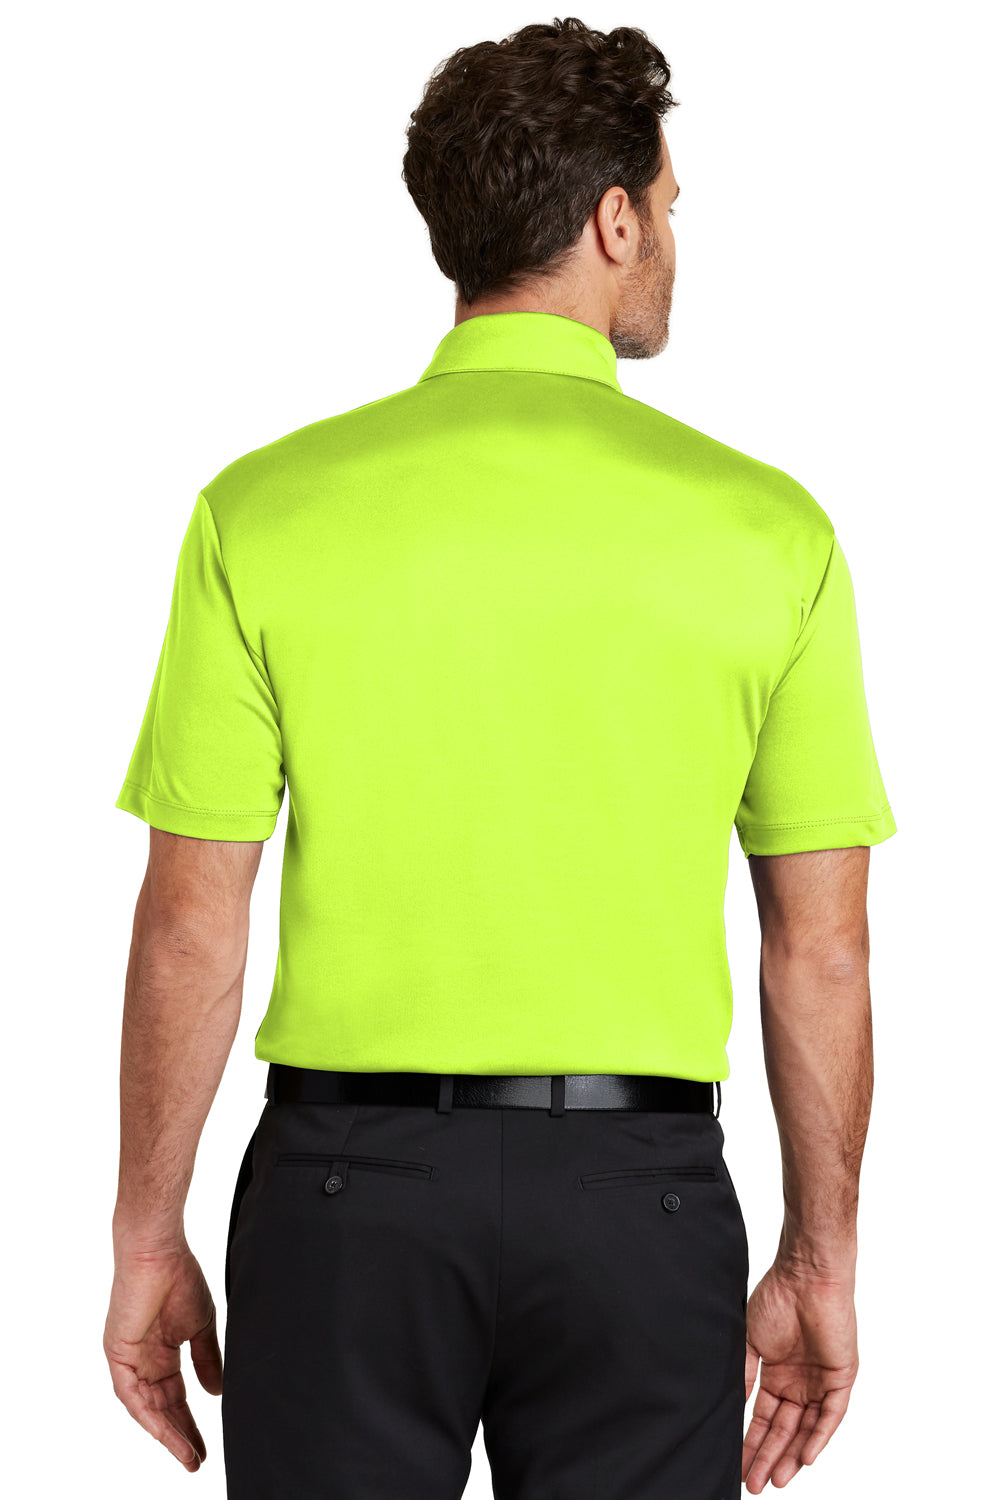 Port Authority K540 Mens Silk Touch Performance Moisture Wicking Short Sleeve Polo Shirt Neon Yellow Back